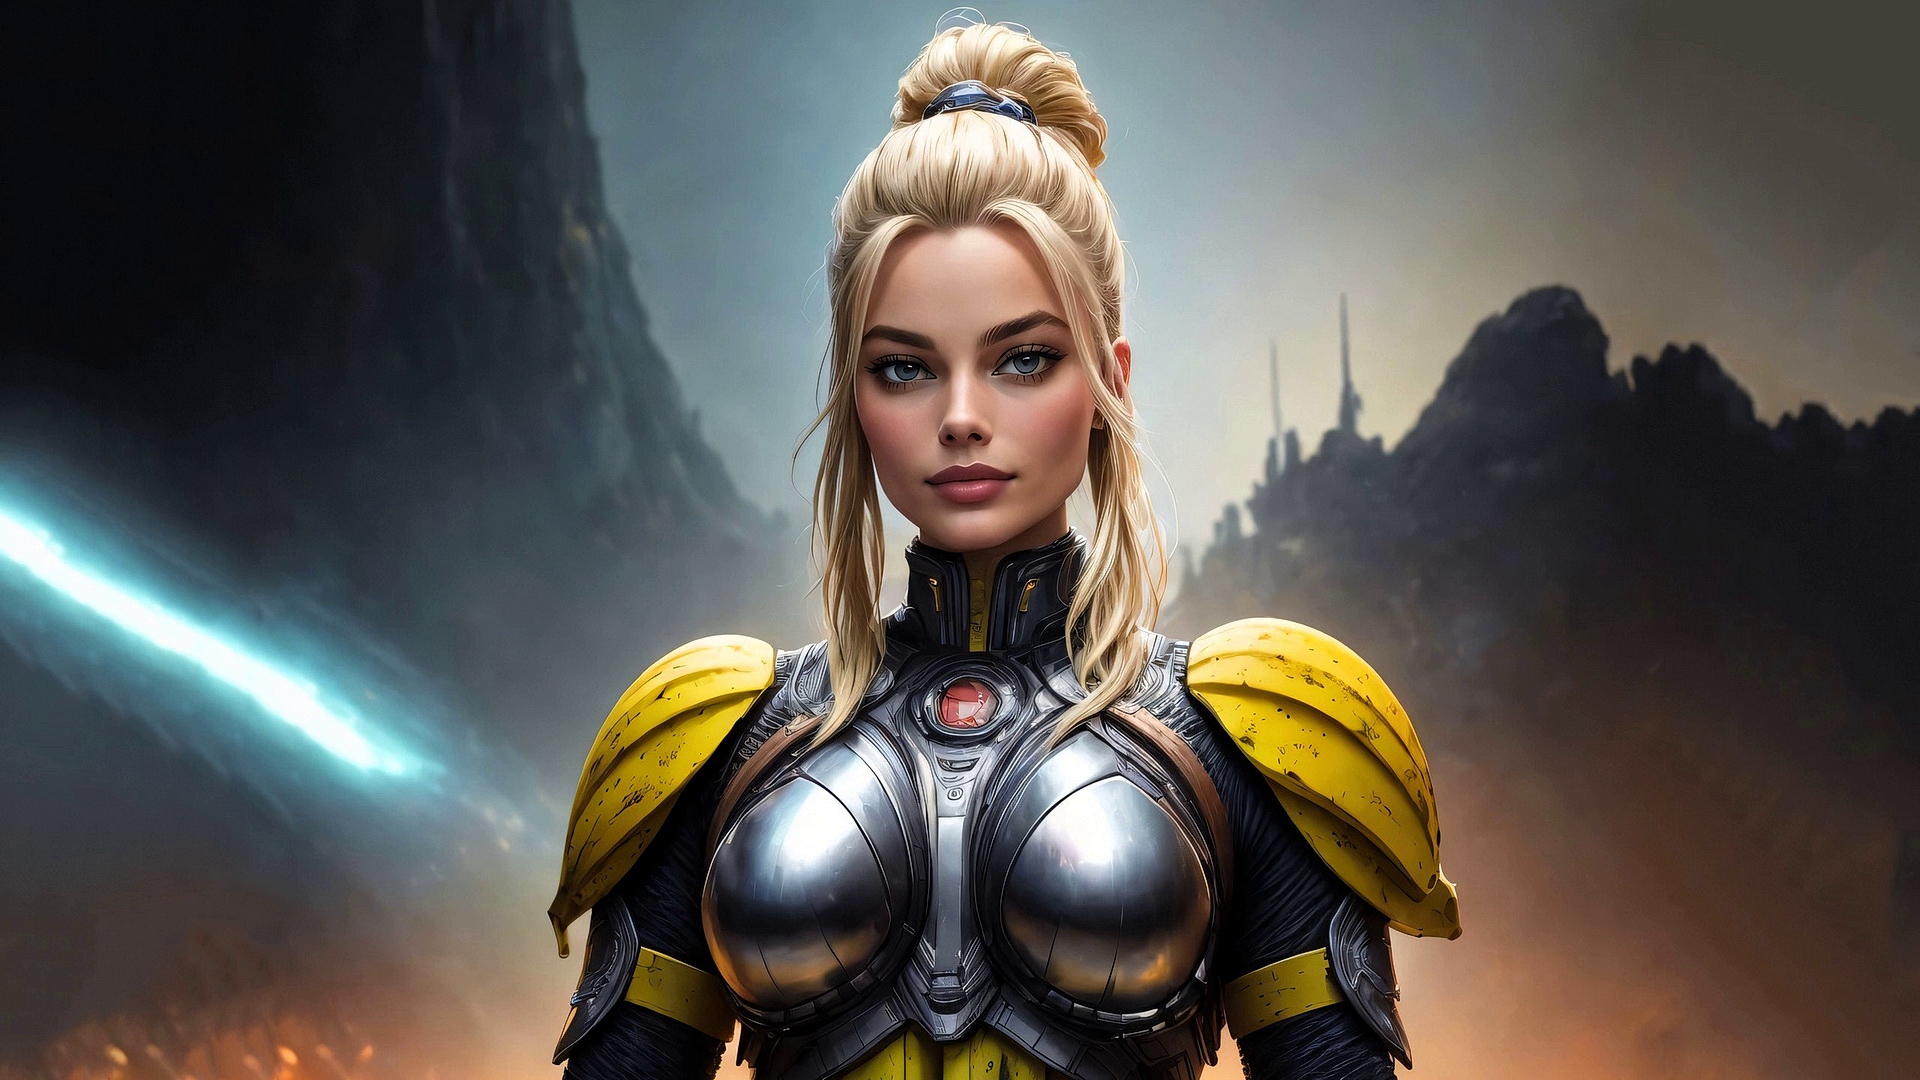 Free photo Portrait of a fantastic girl in armor against a background of mountains